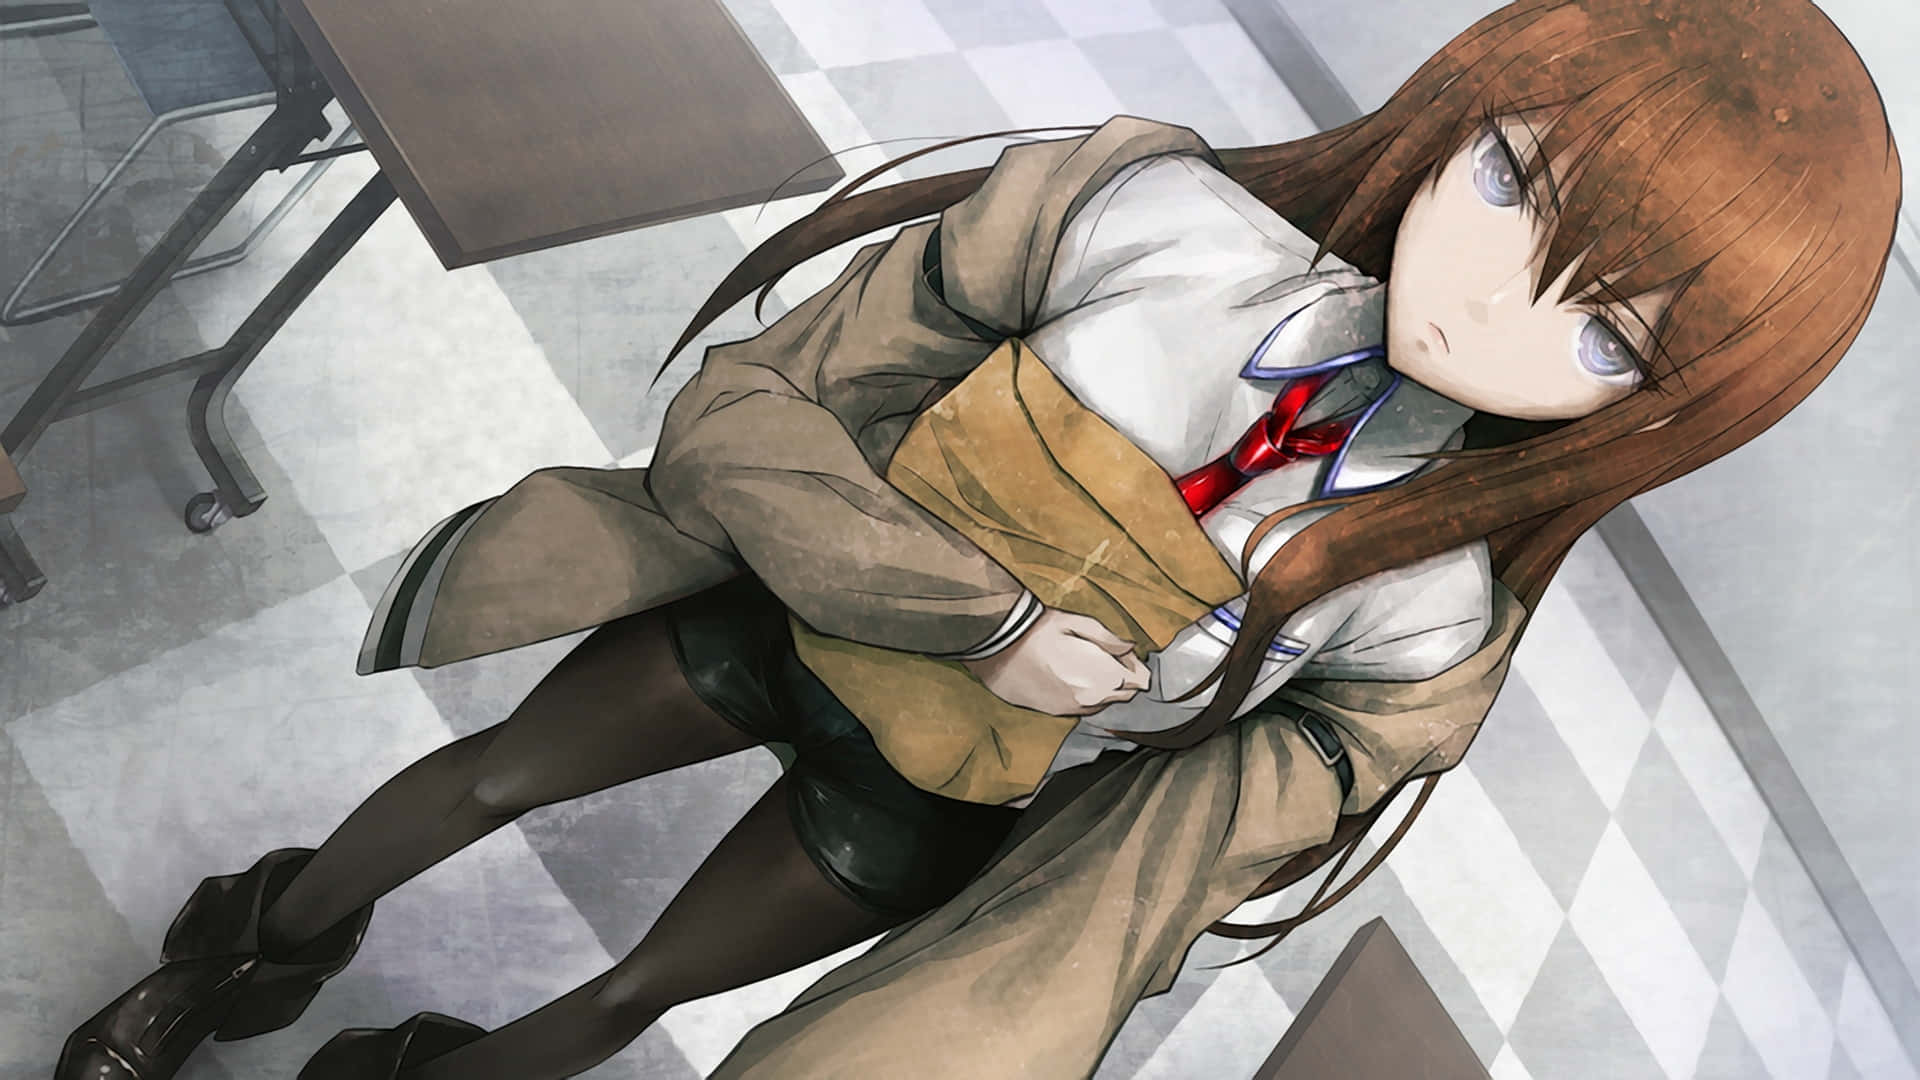 Kurisu Makise standing confidently with a serious expression on her face. Wallpaper